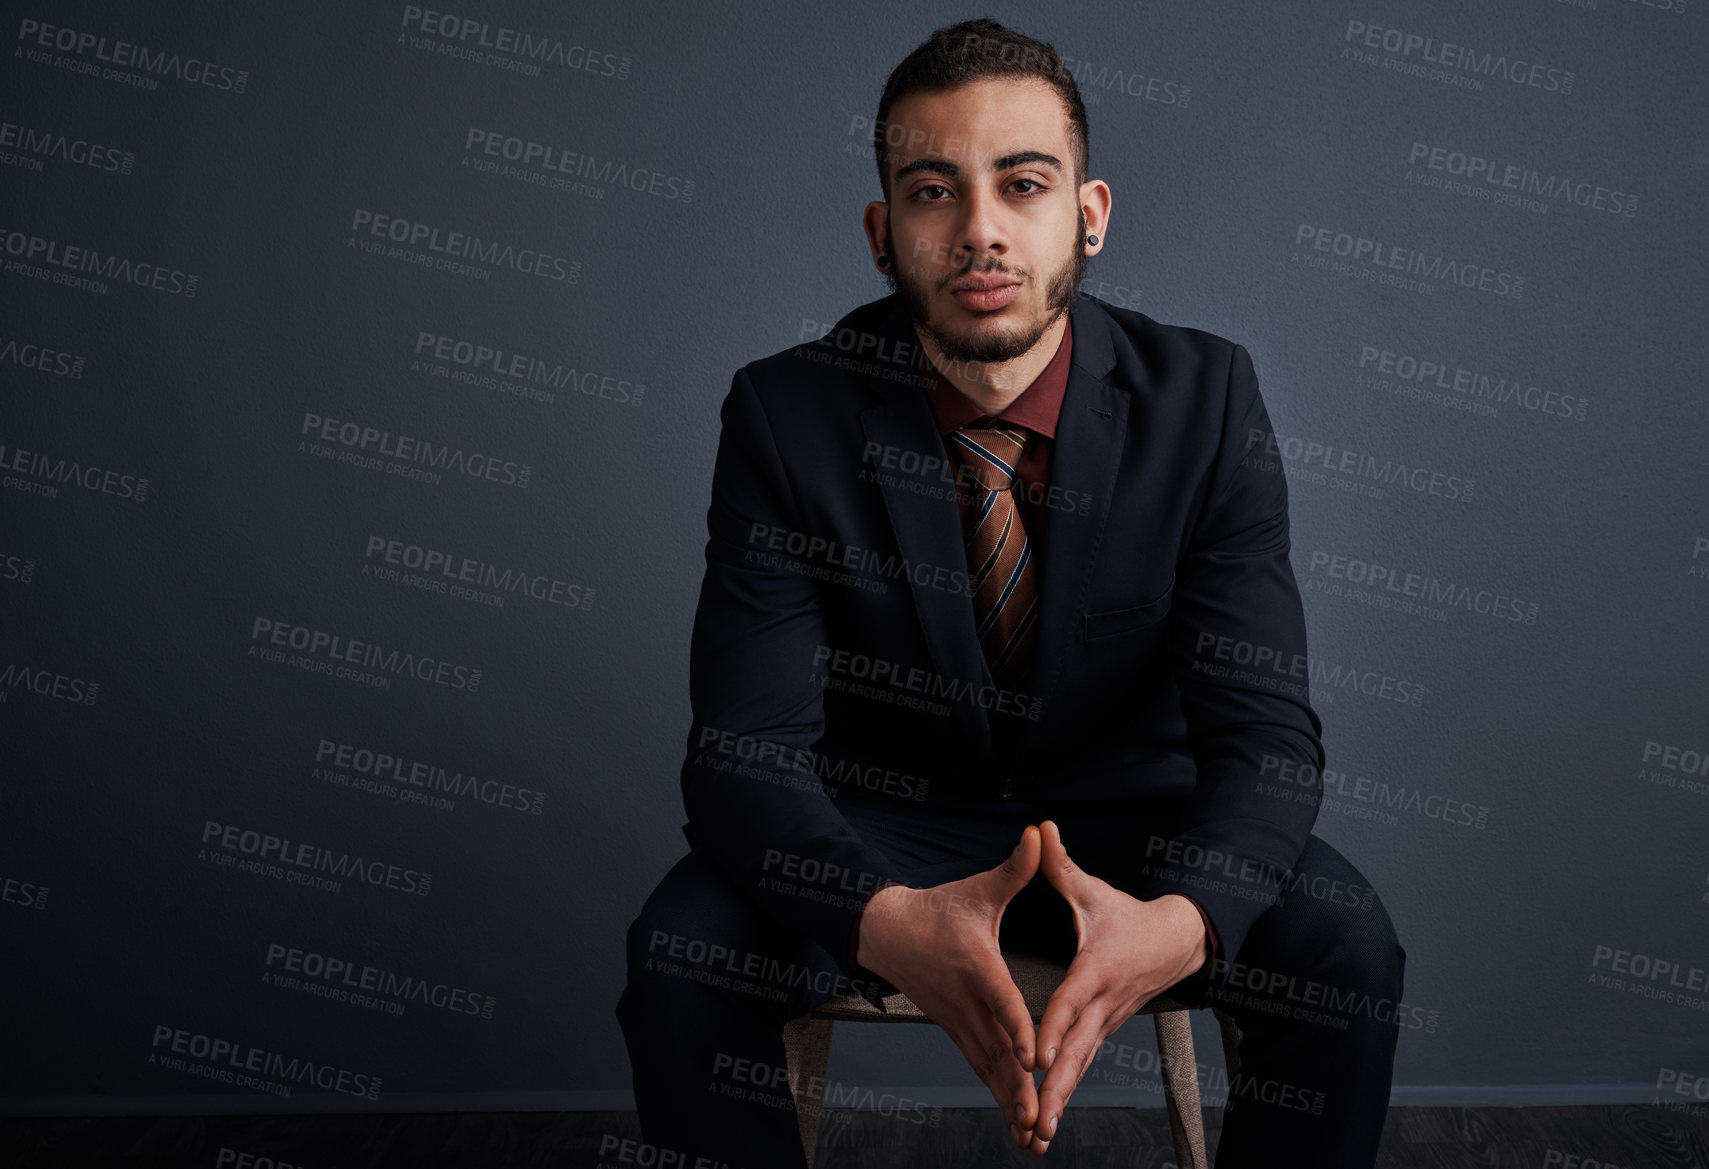 Buy stock photo Studio portrait of a stylish young businessman against a gray background